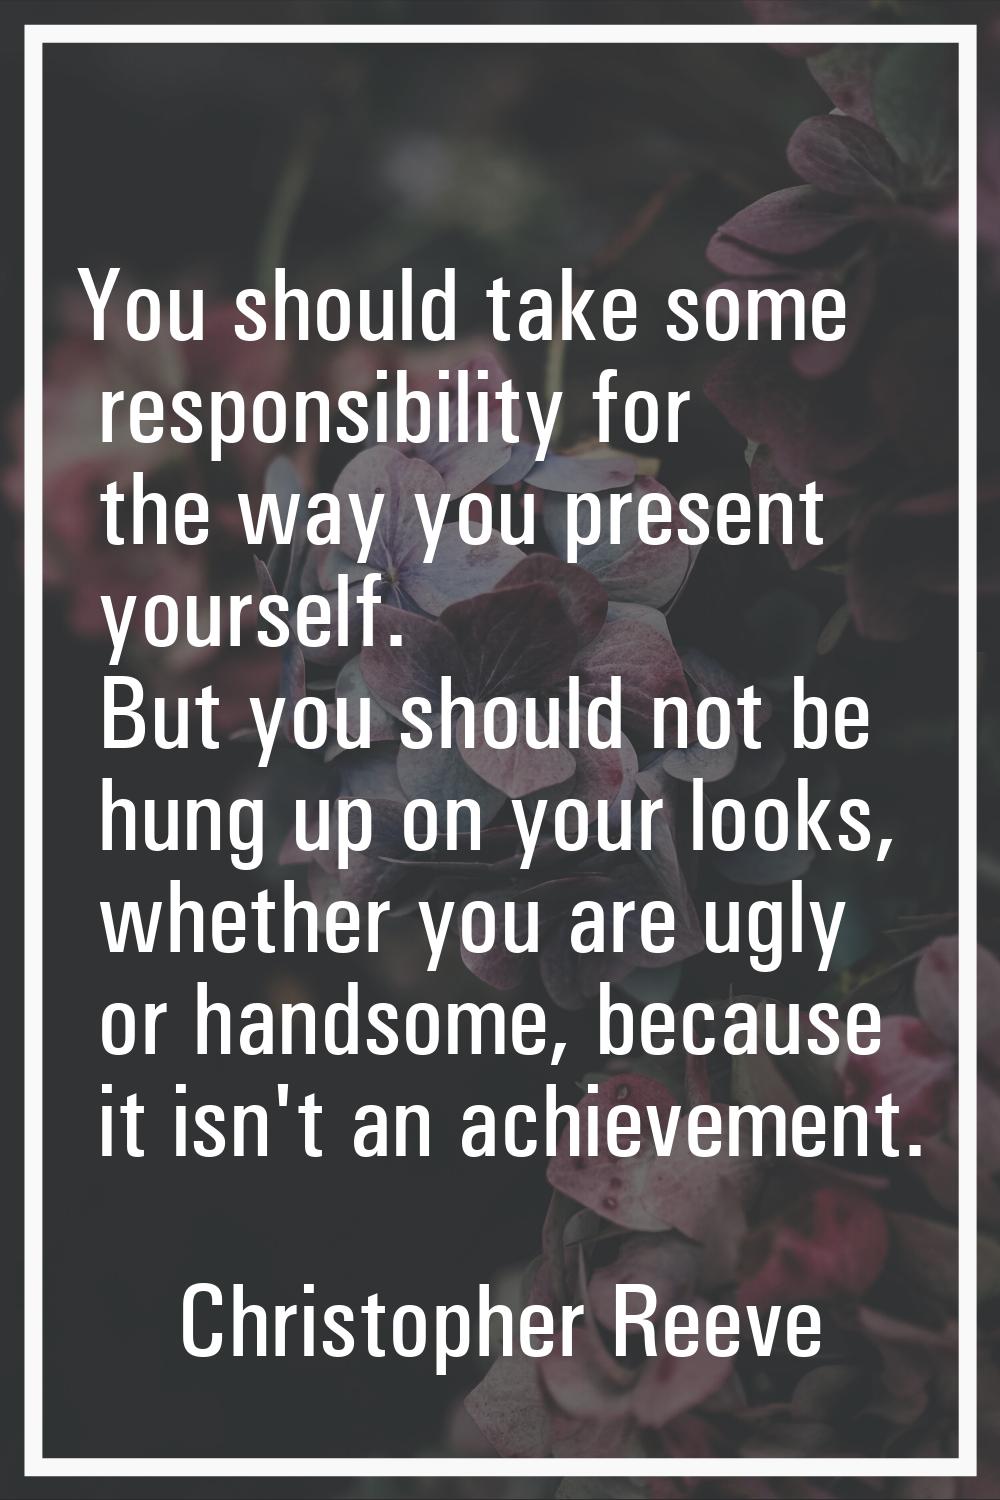 You should take some responsibility for the way you present yourself. But you should not be hung up